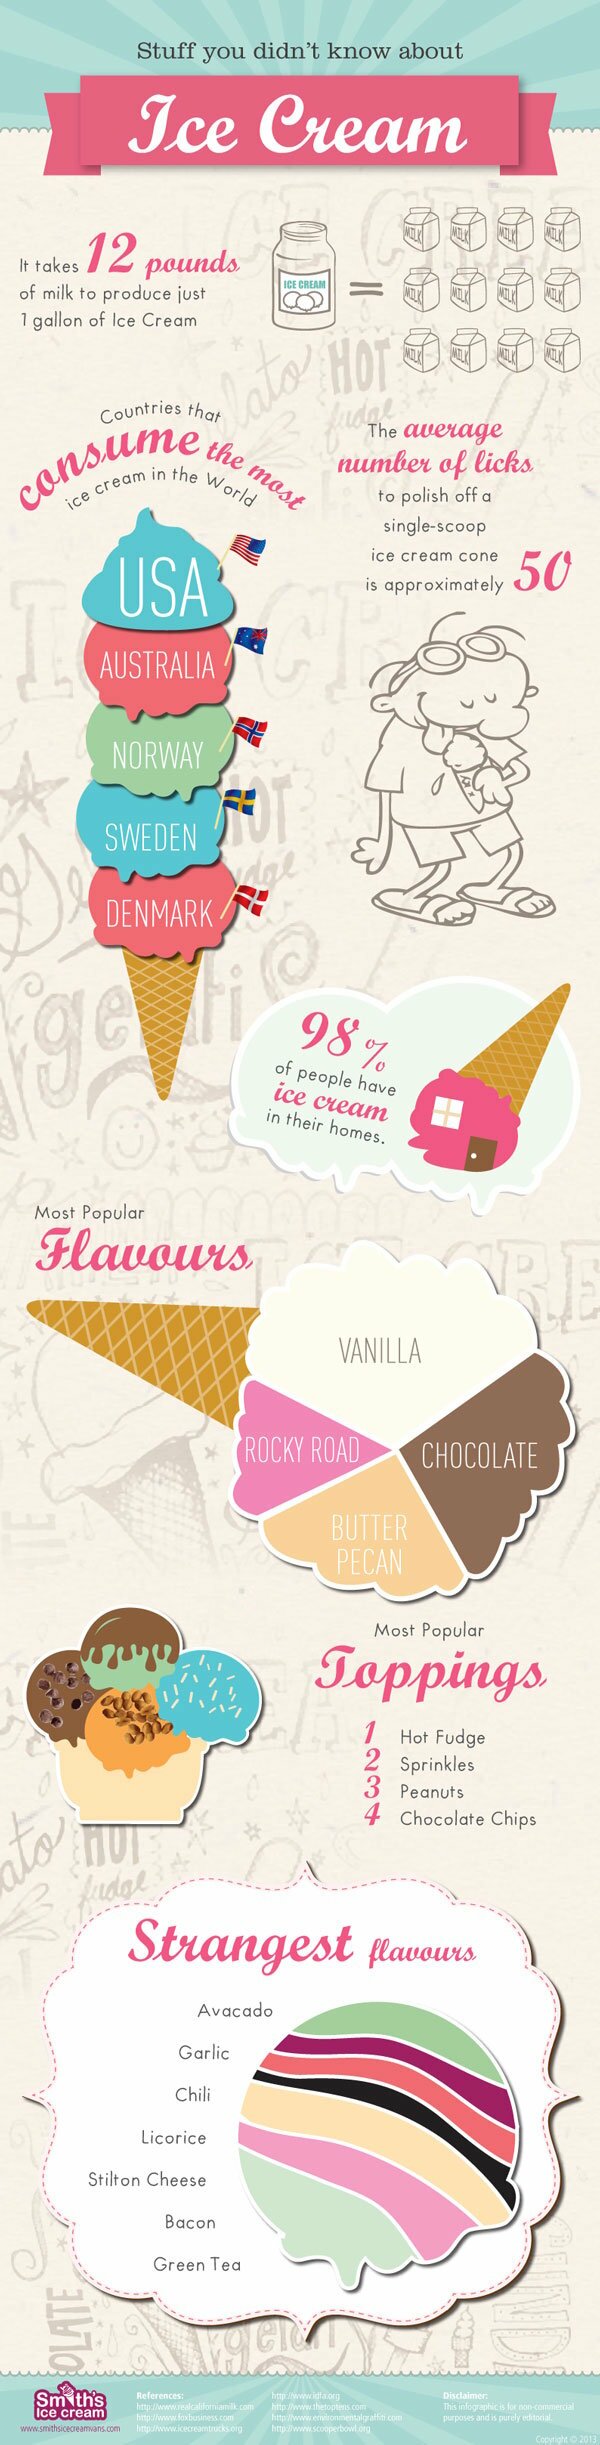 Stuff You Didn't Know about Ice Cream Infographic